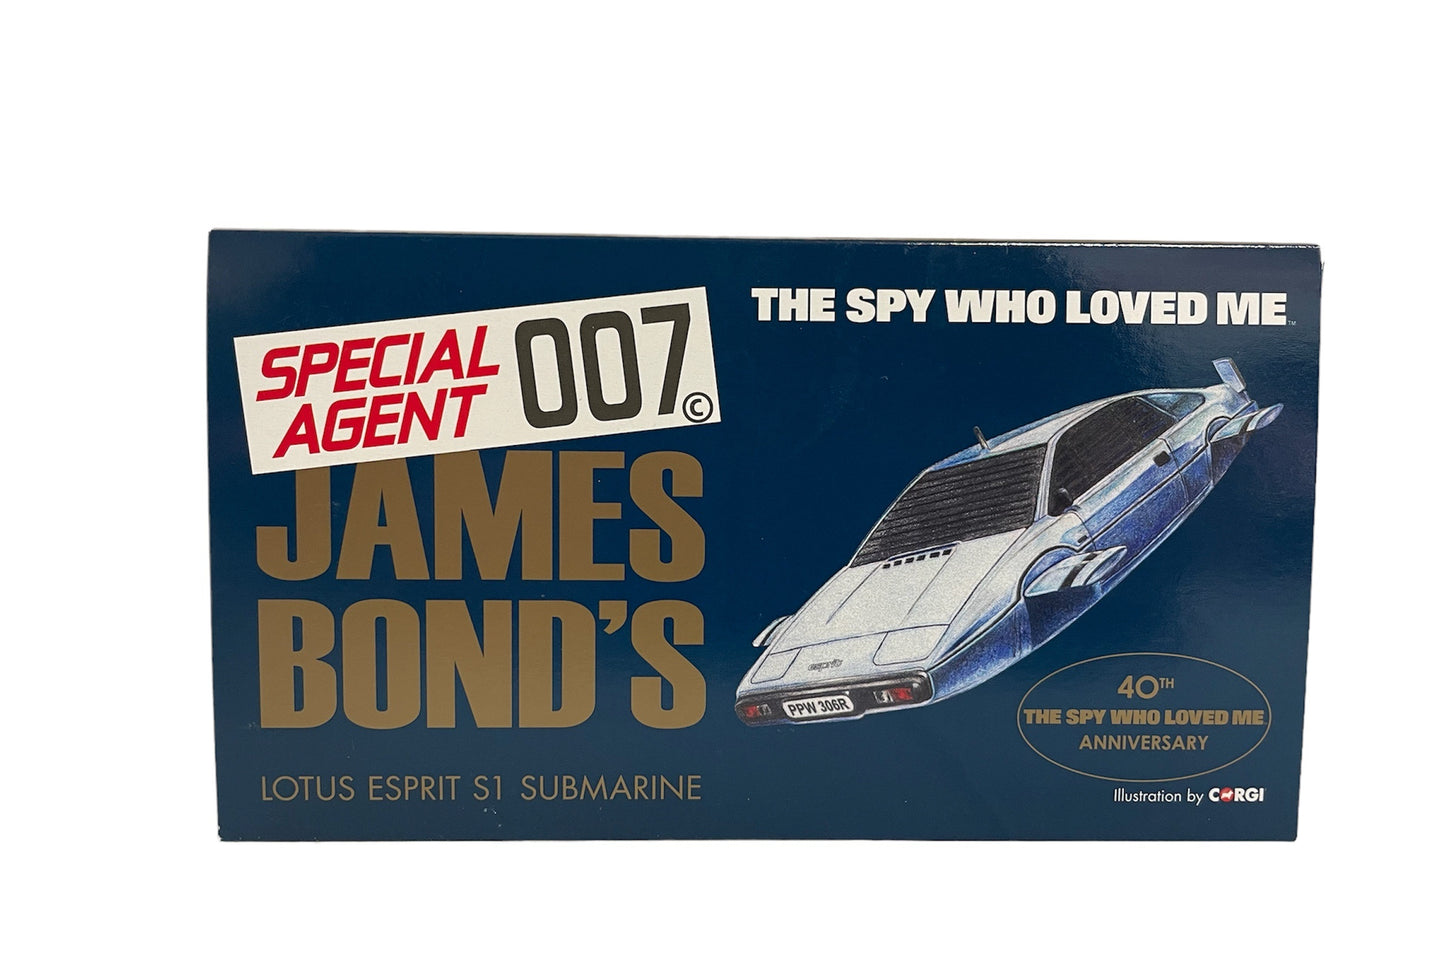 The Spy Who Loved Me Special Agent 007 James Bonds Lotus Esprit S1 Submarine 1:36 Scale Die-Cast 40th Anniversary No. CC04513 - Brand New Shop Stock Room Find